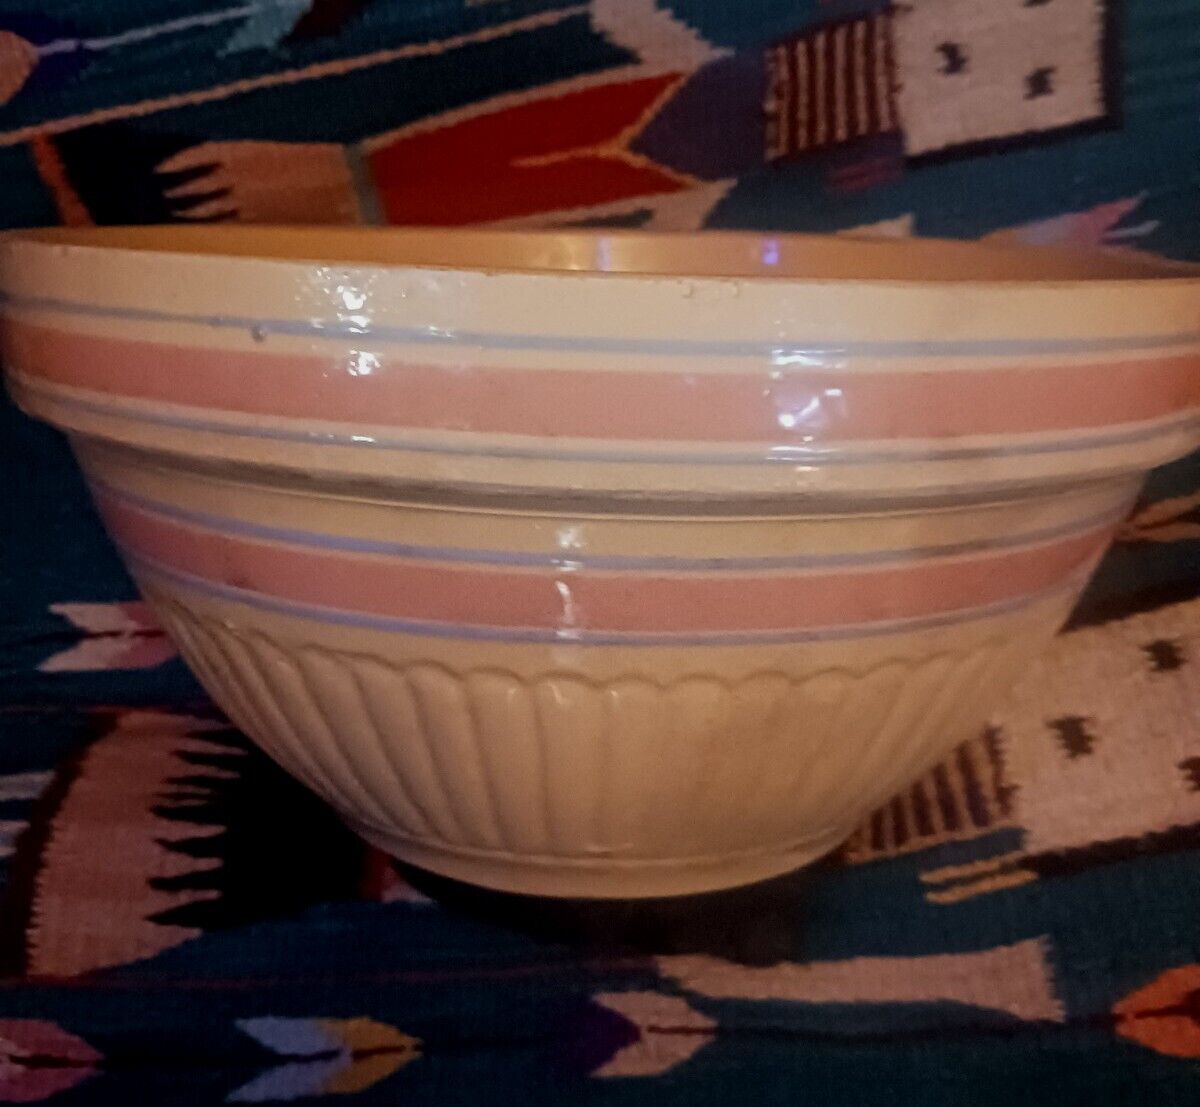 **AWESOME LG. ANTIQUE CROCK MIXING BOWL PINK BLUE STRIPE YELLOW WARE VERY NICE\